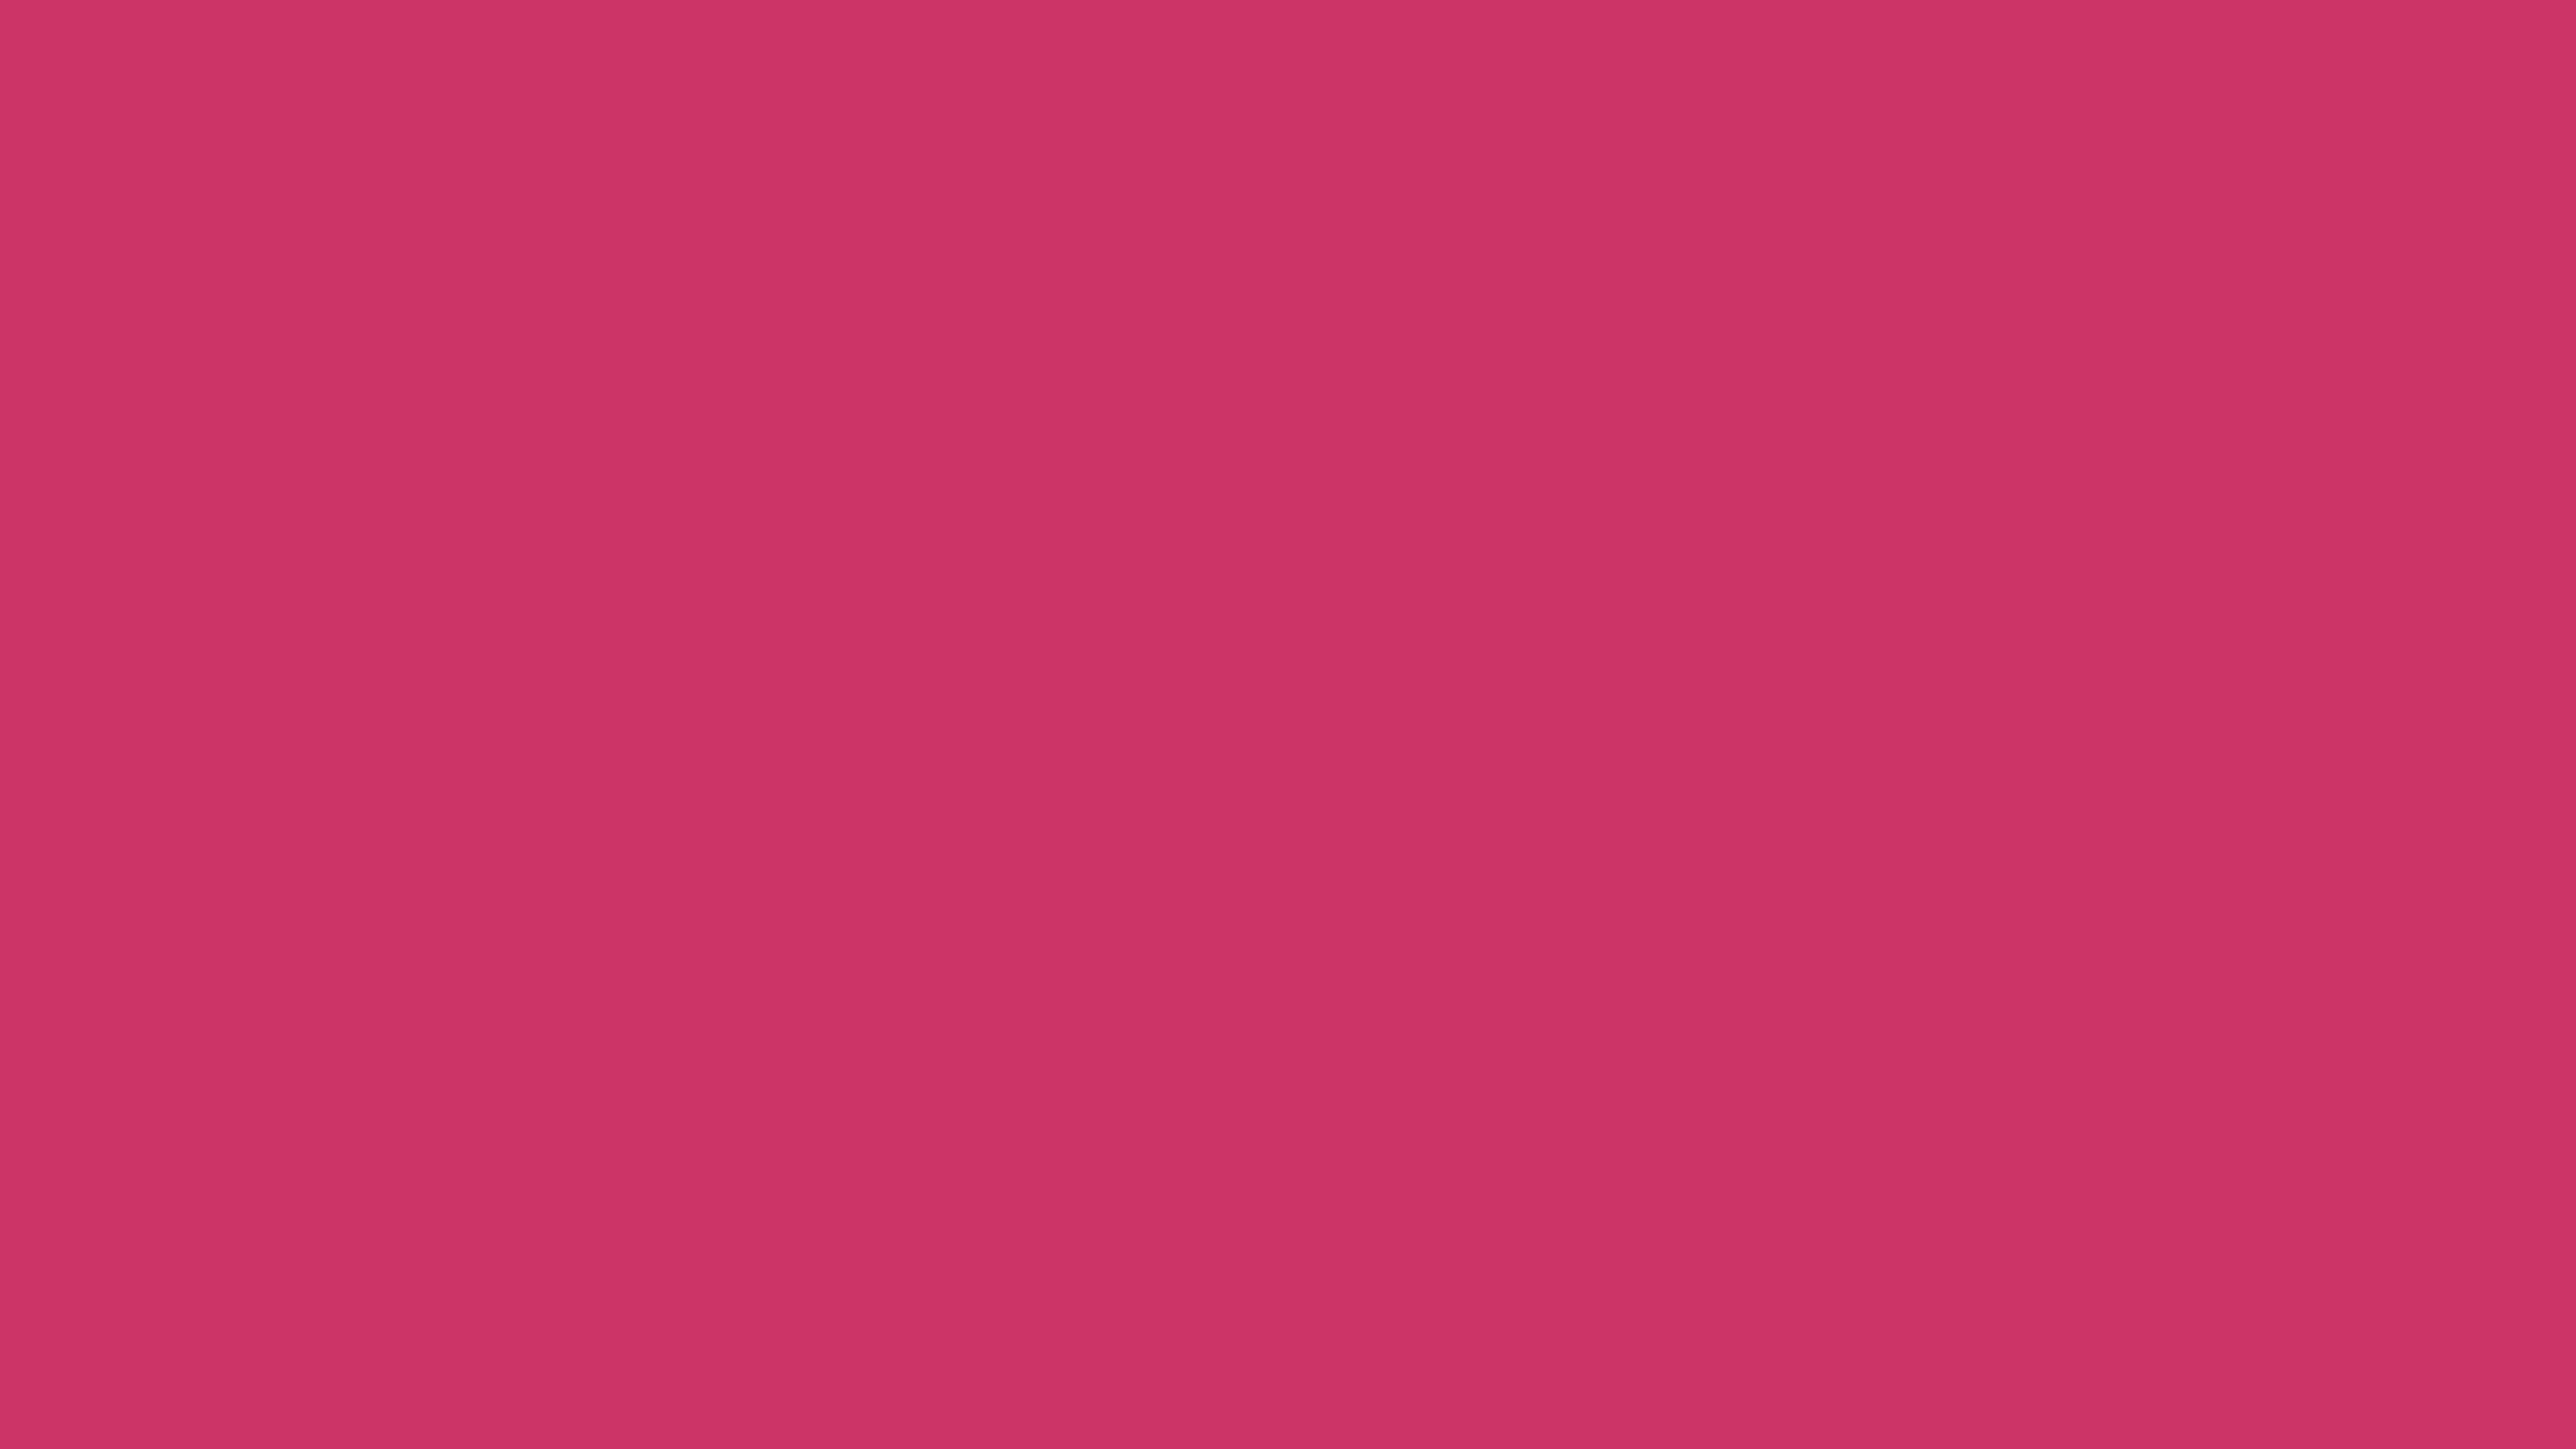 7680x4320 Steel Pink Solid Color Background